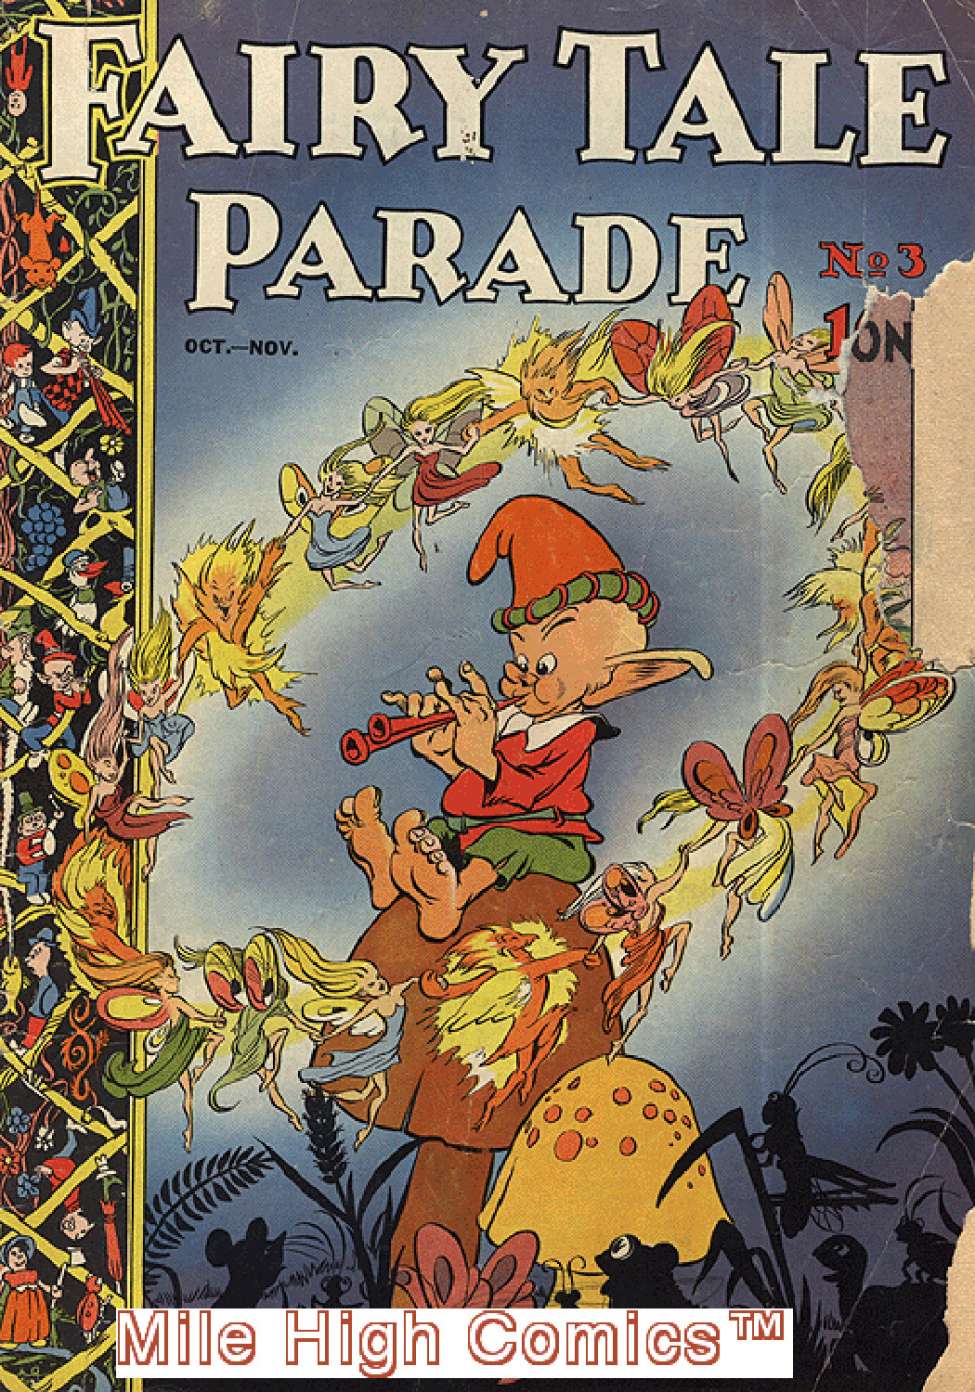 Book Cover For Fairy Tale Parade 3